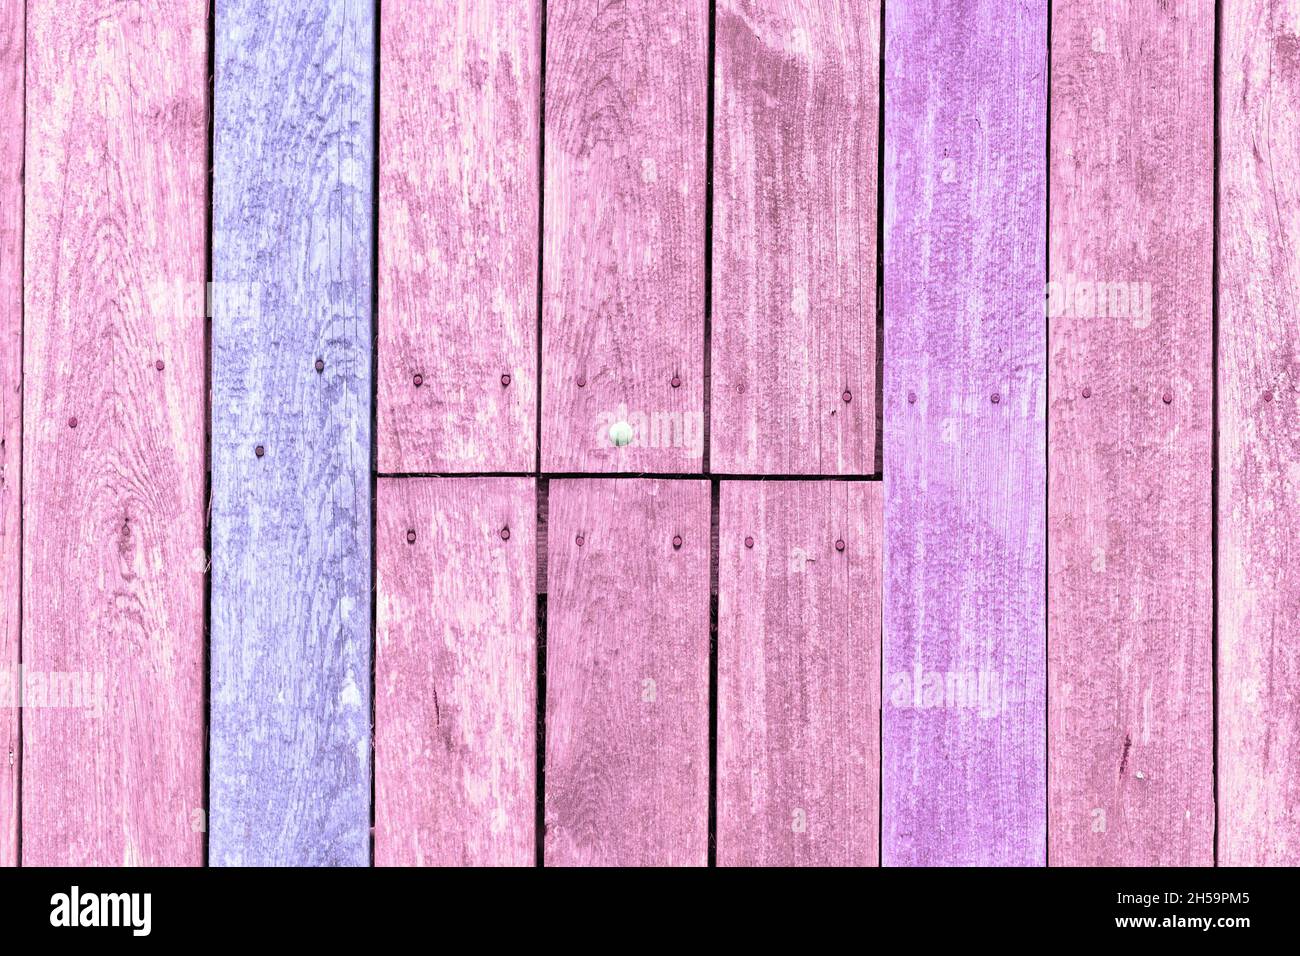 Wooden background with pink and purple painted planks Stock Photo